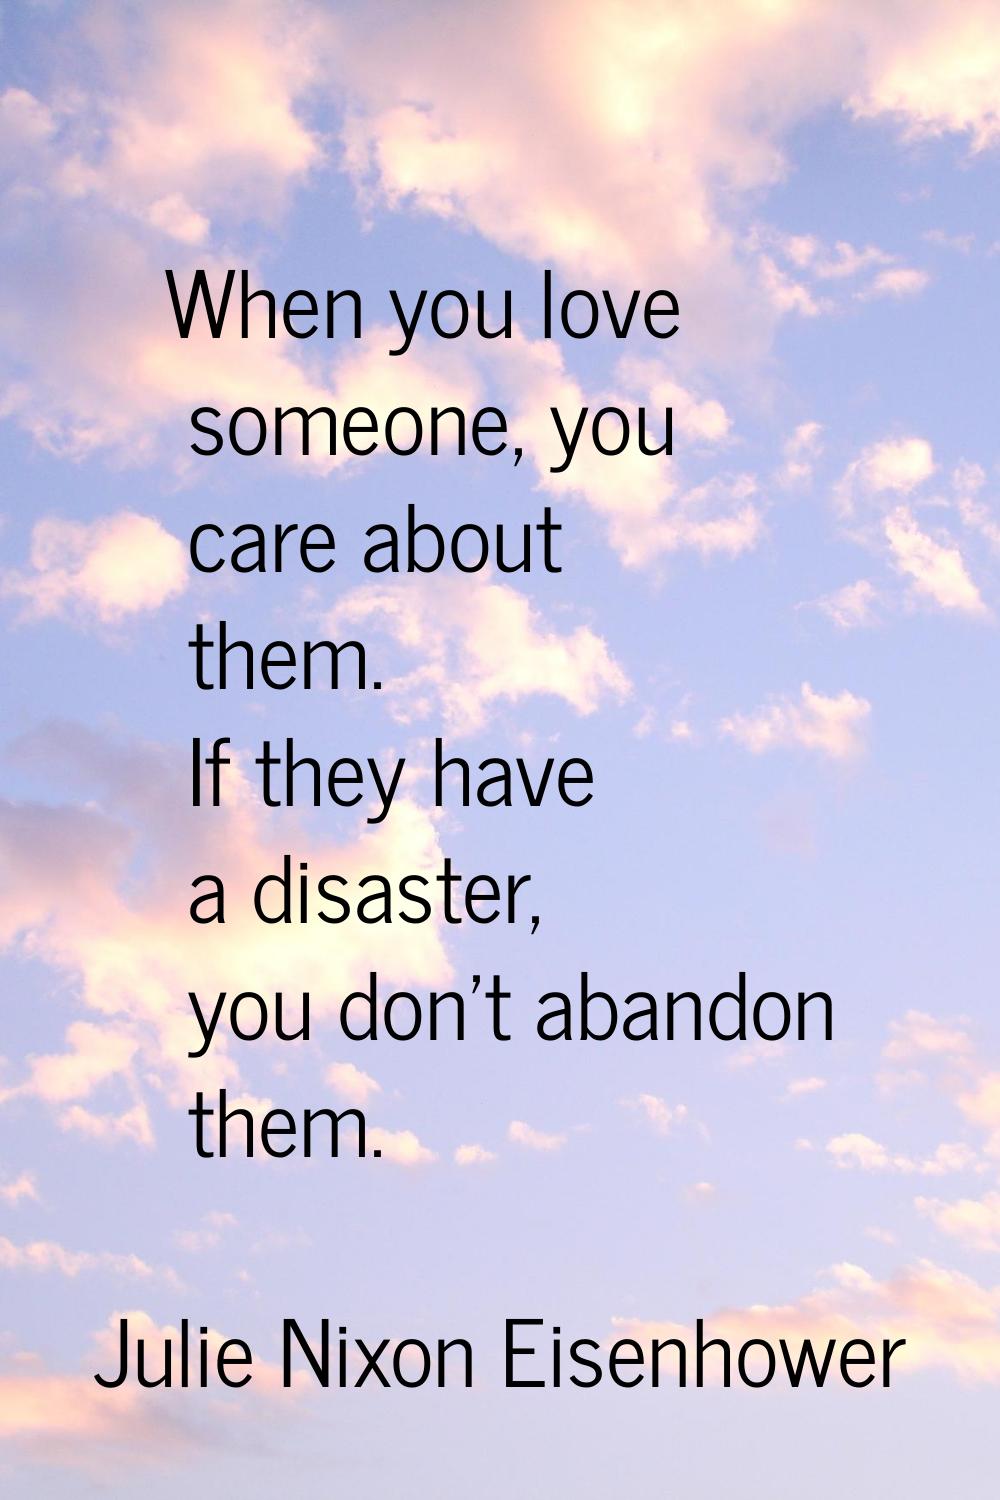 When you love someone, you care about them. If they have a disaster, you don't abandon them.